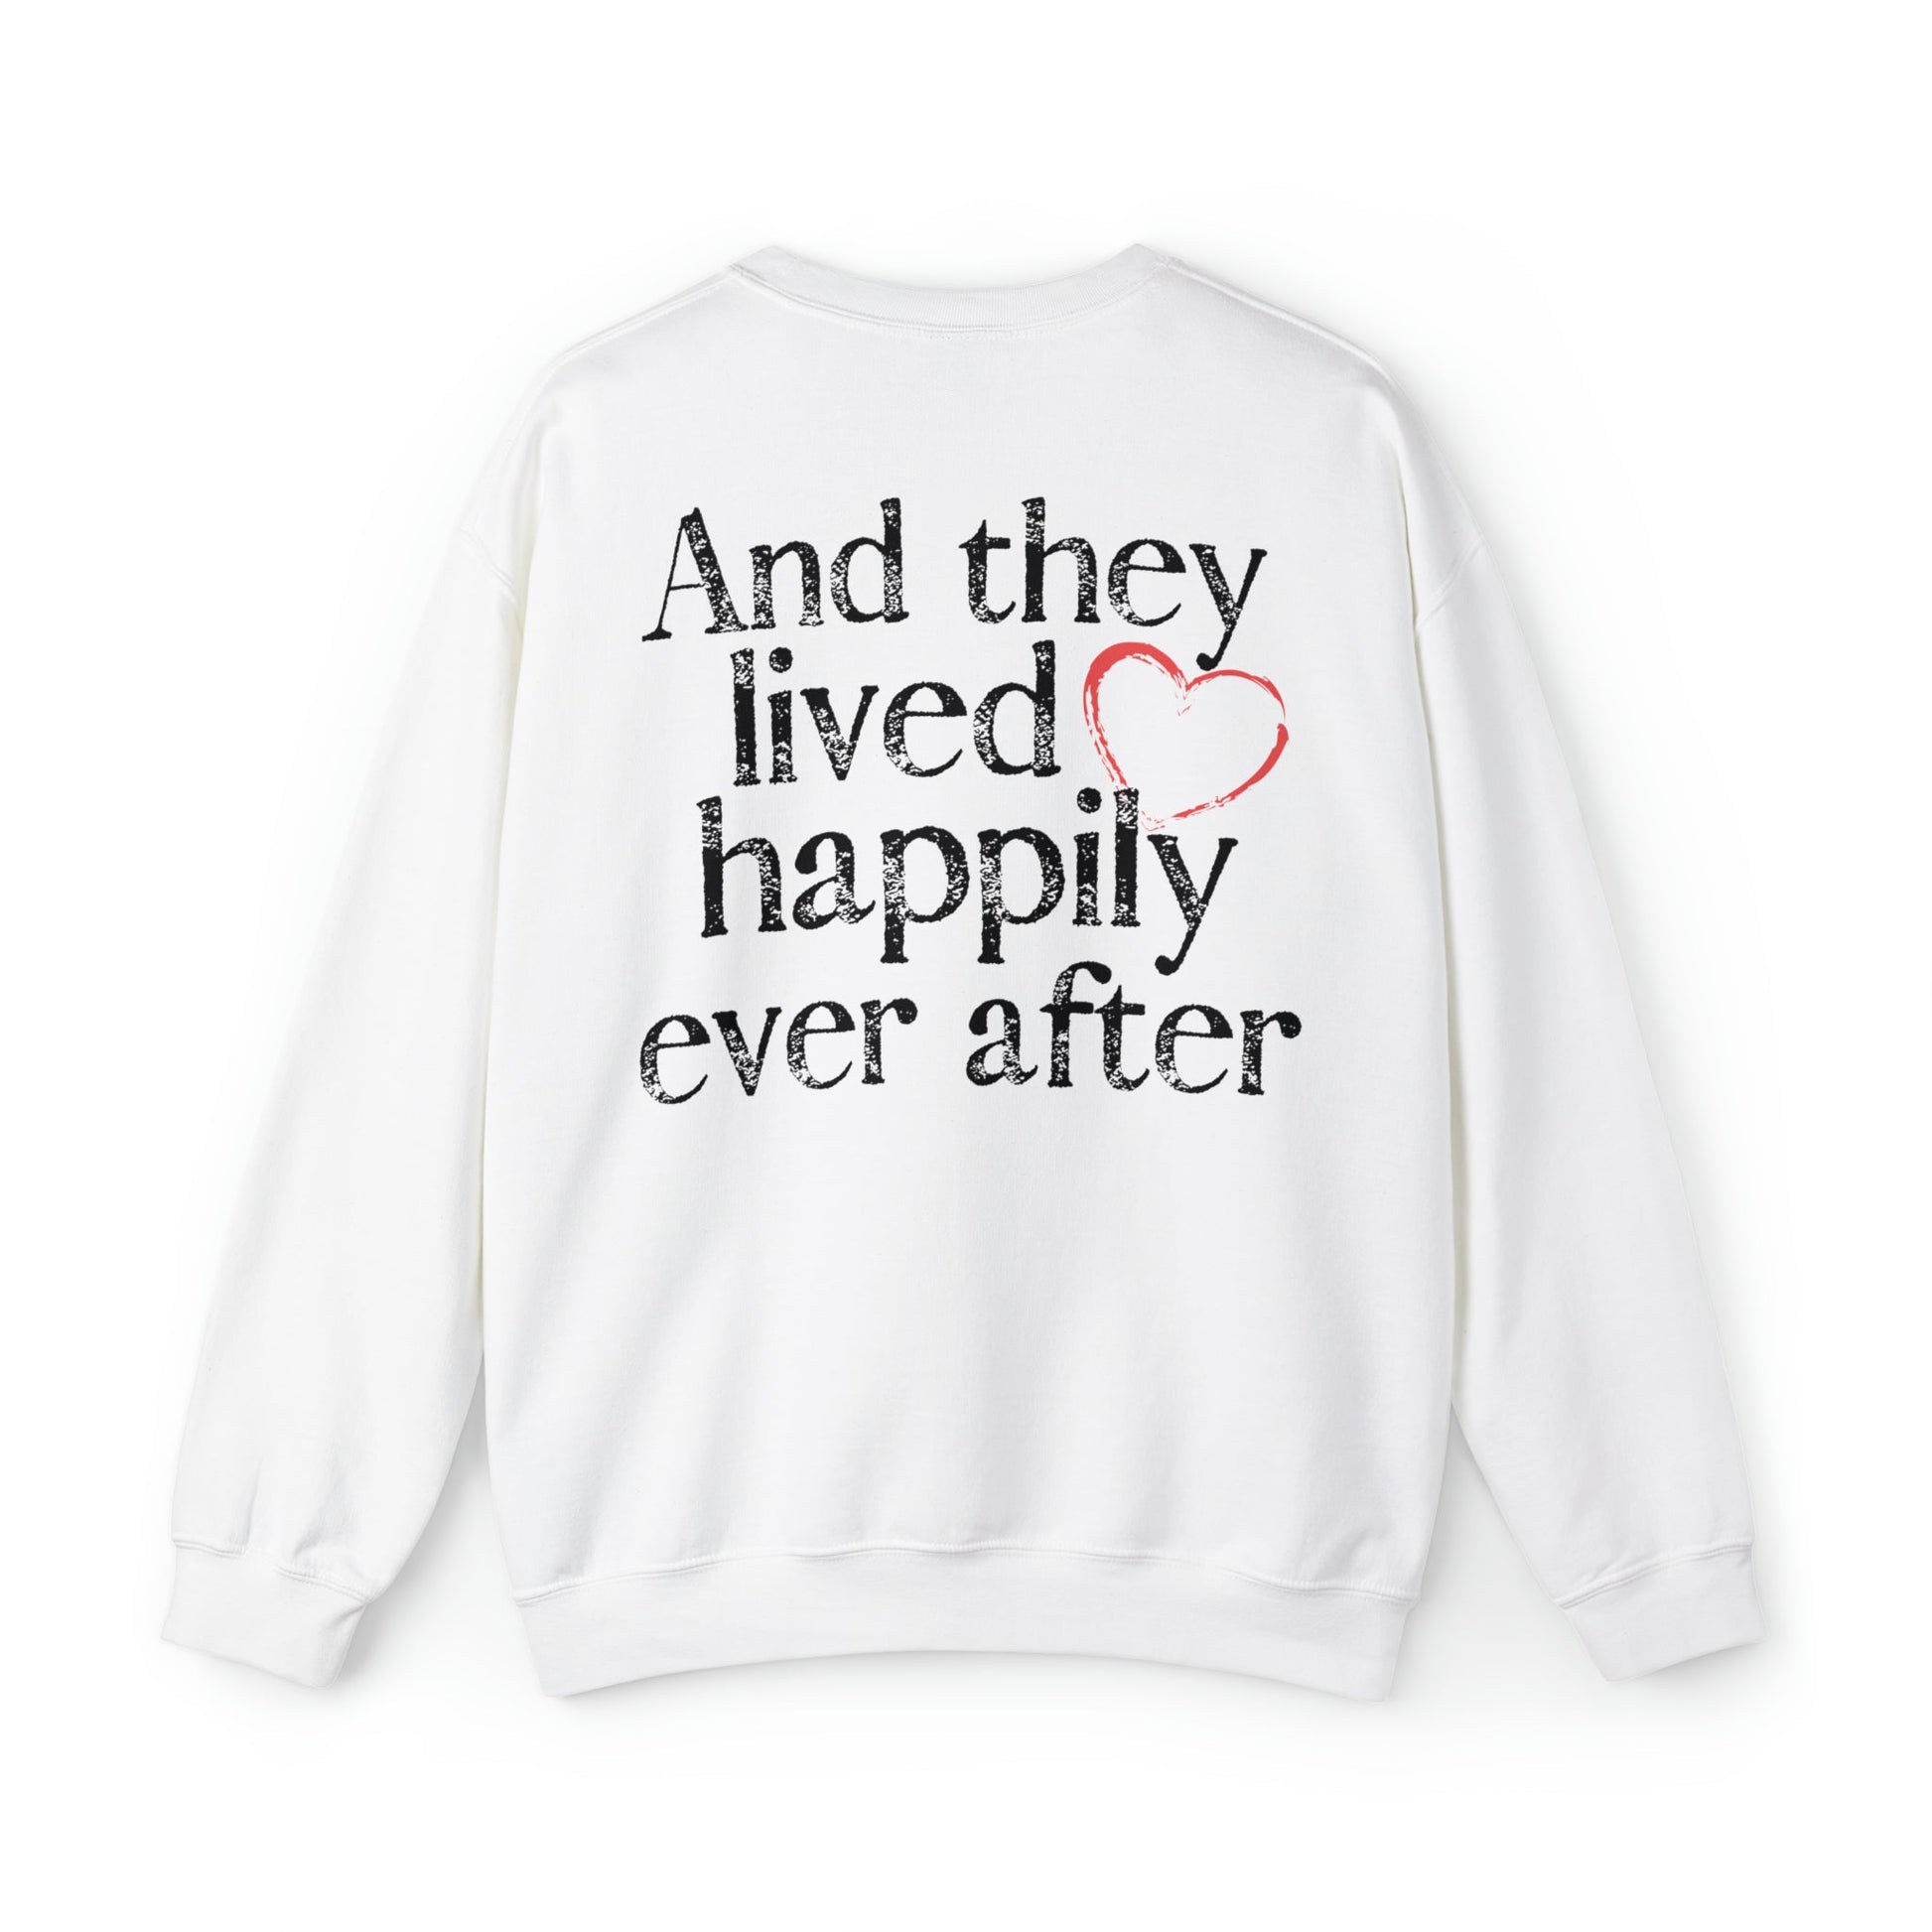 And They Lived Happily Ever After Sweatshirt, Back Design, Honeymoon Outfit, Bride Gift, Shirt For Photos, Cute Hoodie Fiancé Engaged - lemonanddot